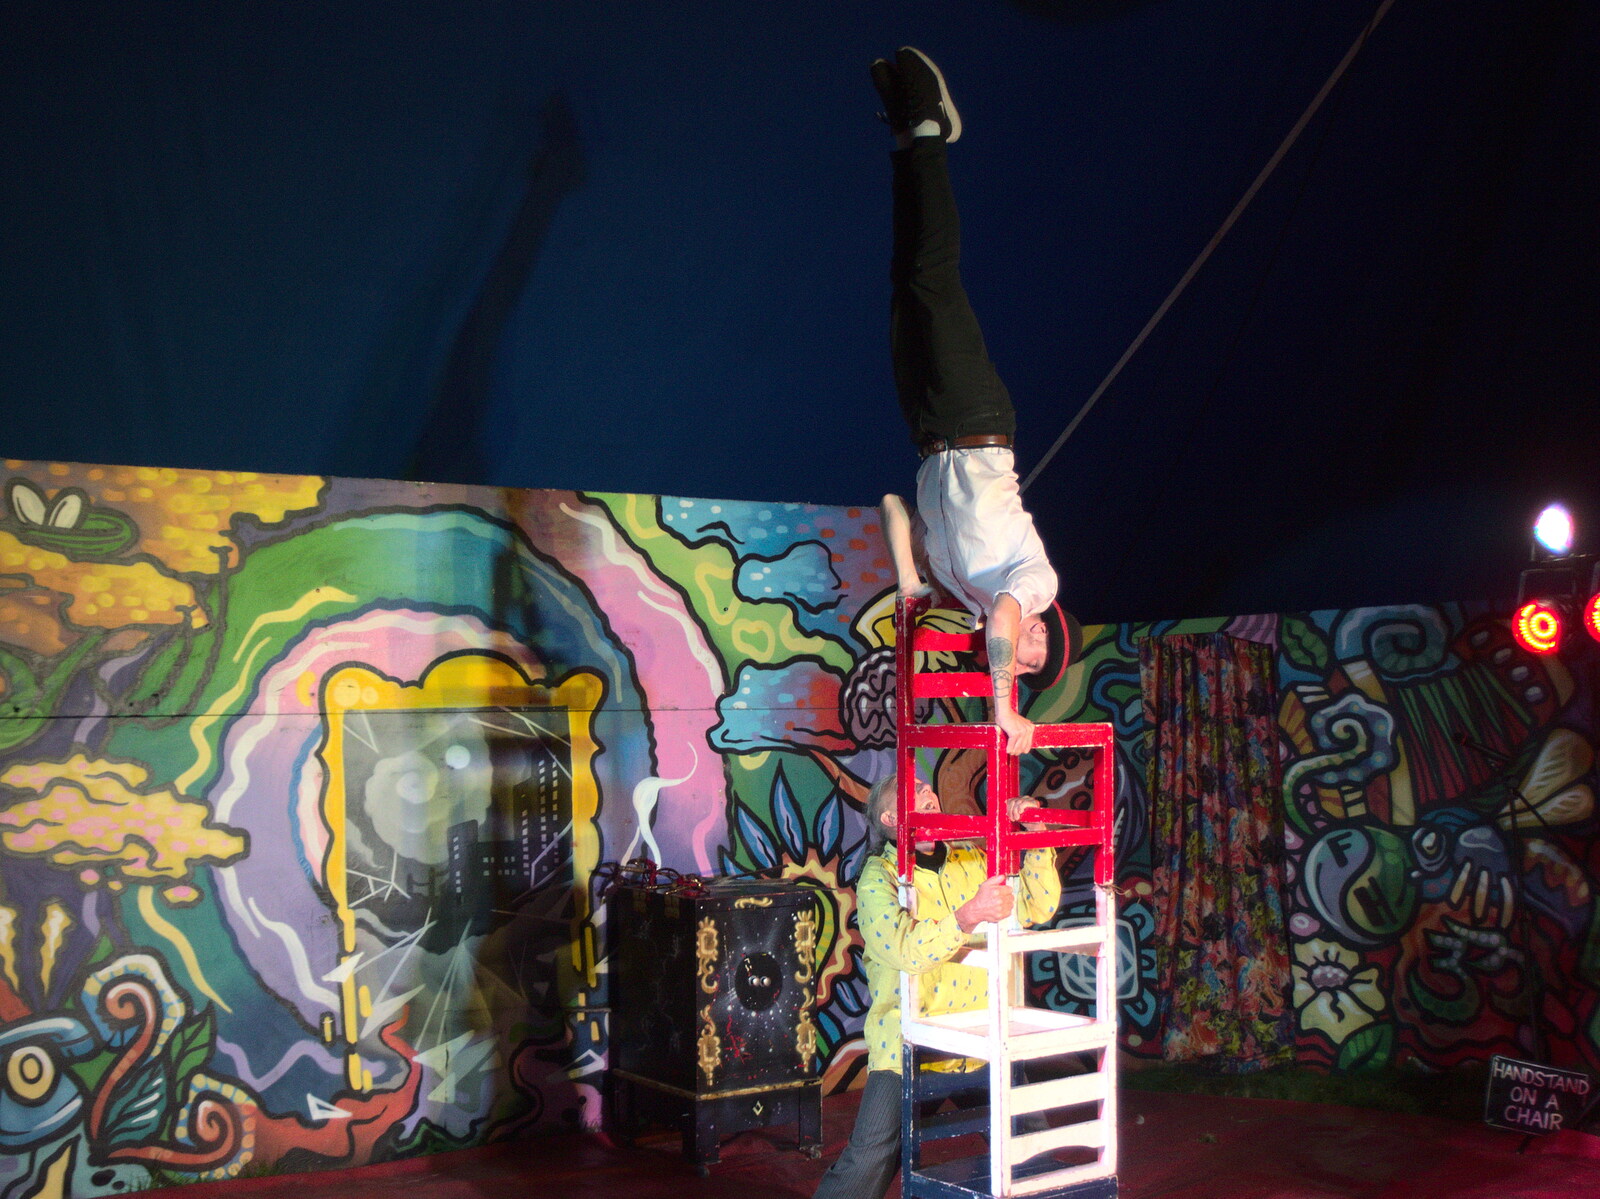 Handstand on stacked chairs from Maui Waui Festival, Hill Farm, Gressenhall, Norfolk - 28th August 2021